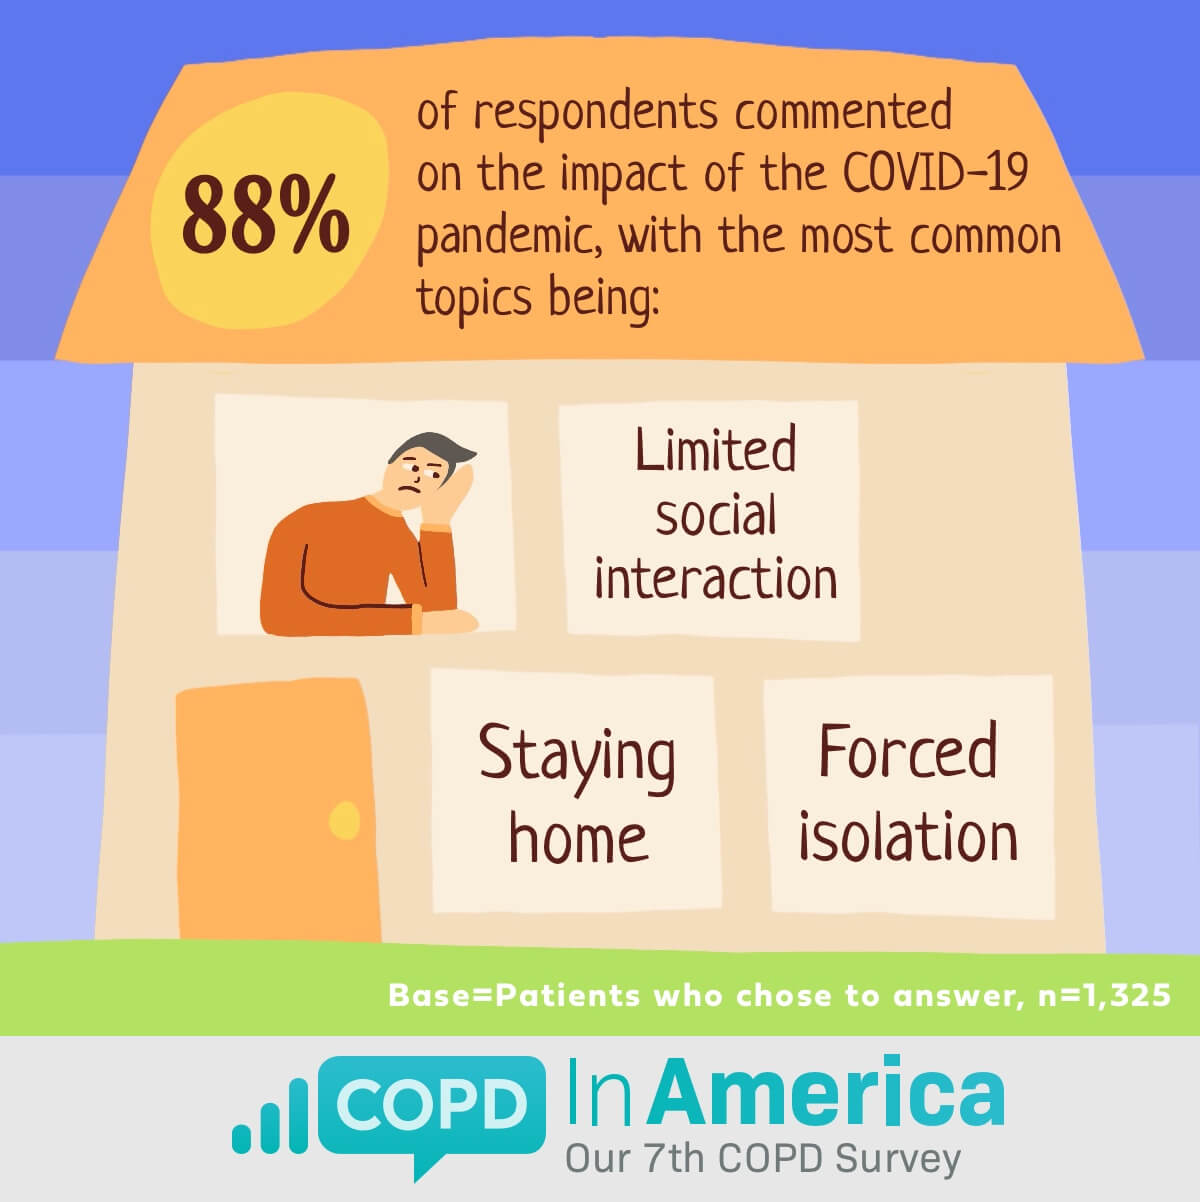 IMPACT OF COVID-19: An image of a man standing in front of the window of a home has the following data on it: 88% of respondents commented on the impact of the COVID-19 pandemic, with the most common topics being: limited social interaction, staying home, forced isolation. 